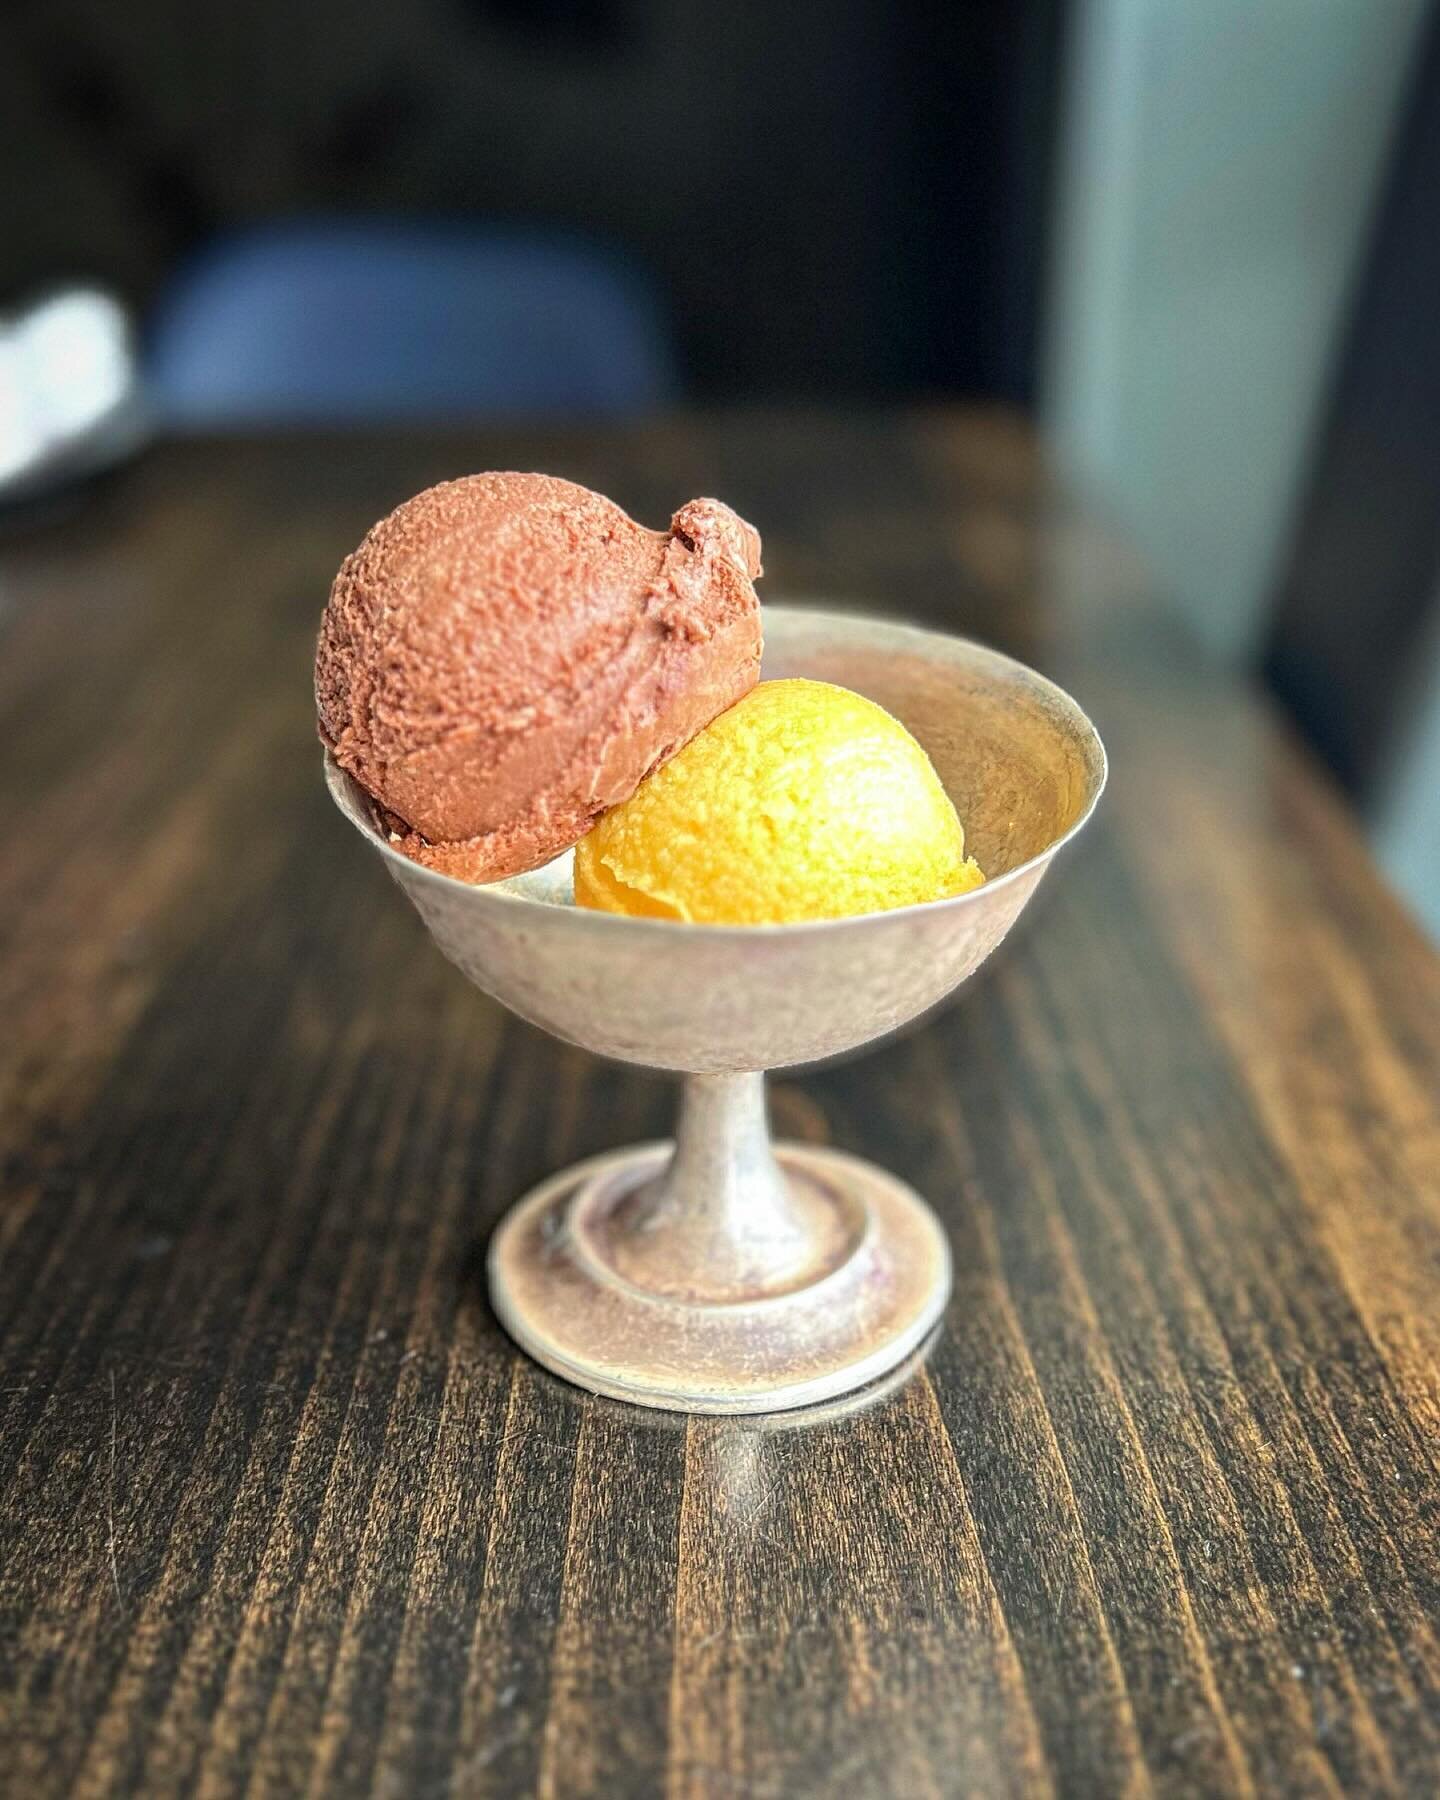 Lover&rsquo;s scoops &hearts;️ milk chocolate ice cream and passion fruit sorbet. Happy Valentine&rsquo;s Day, y&rsquo;all.